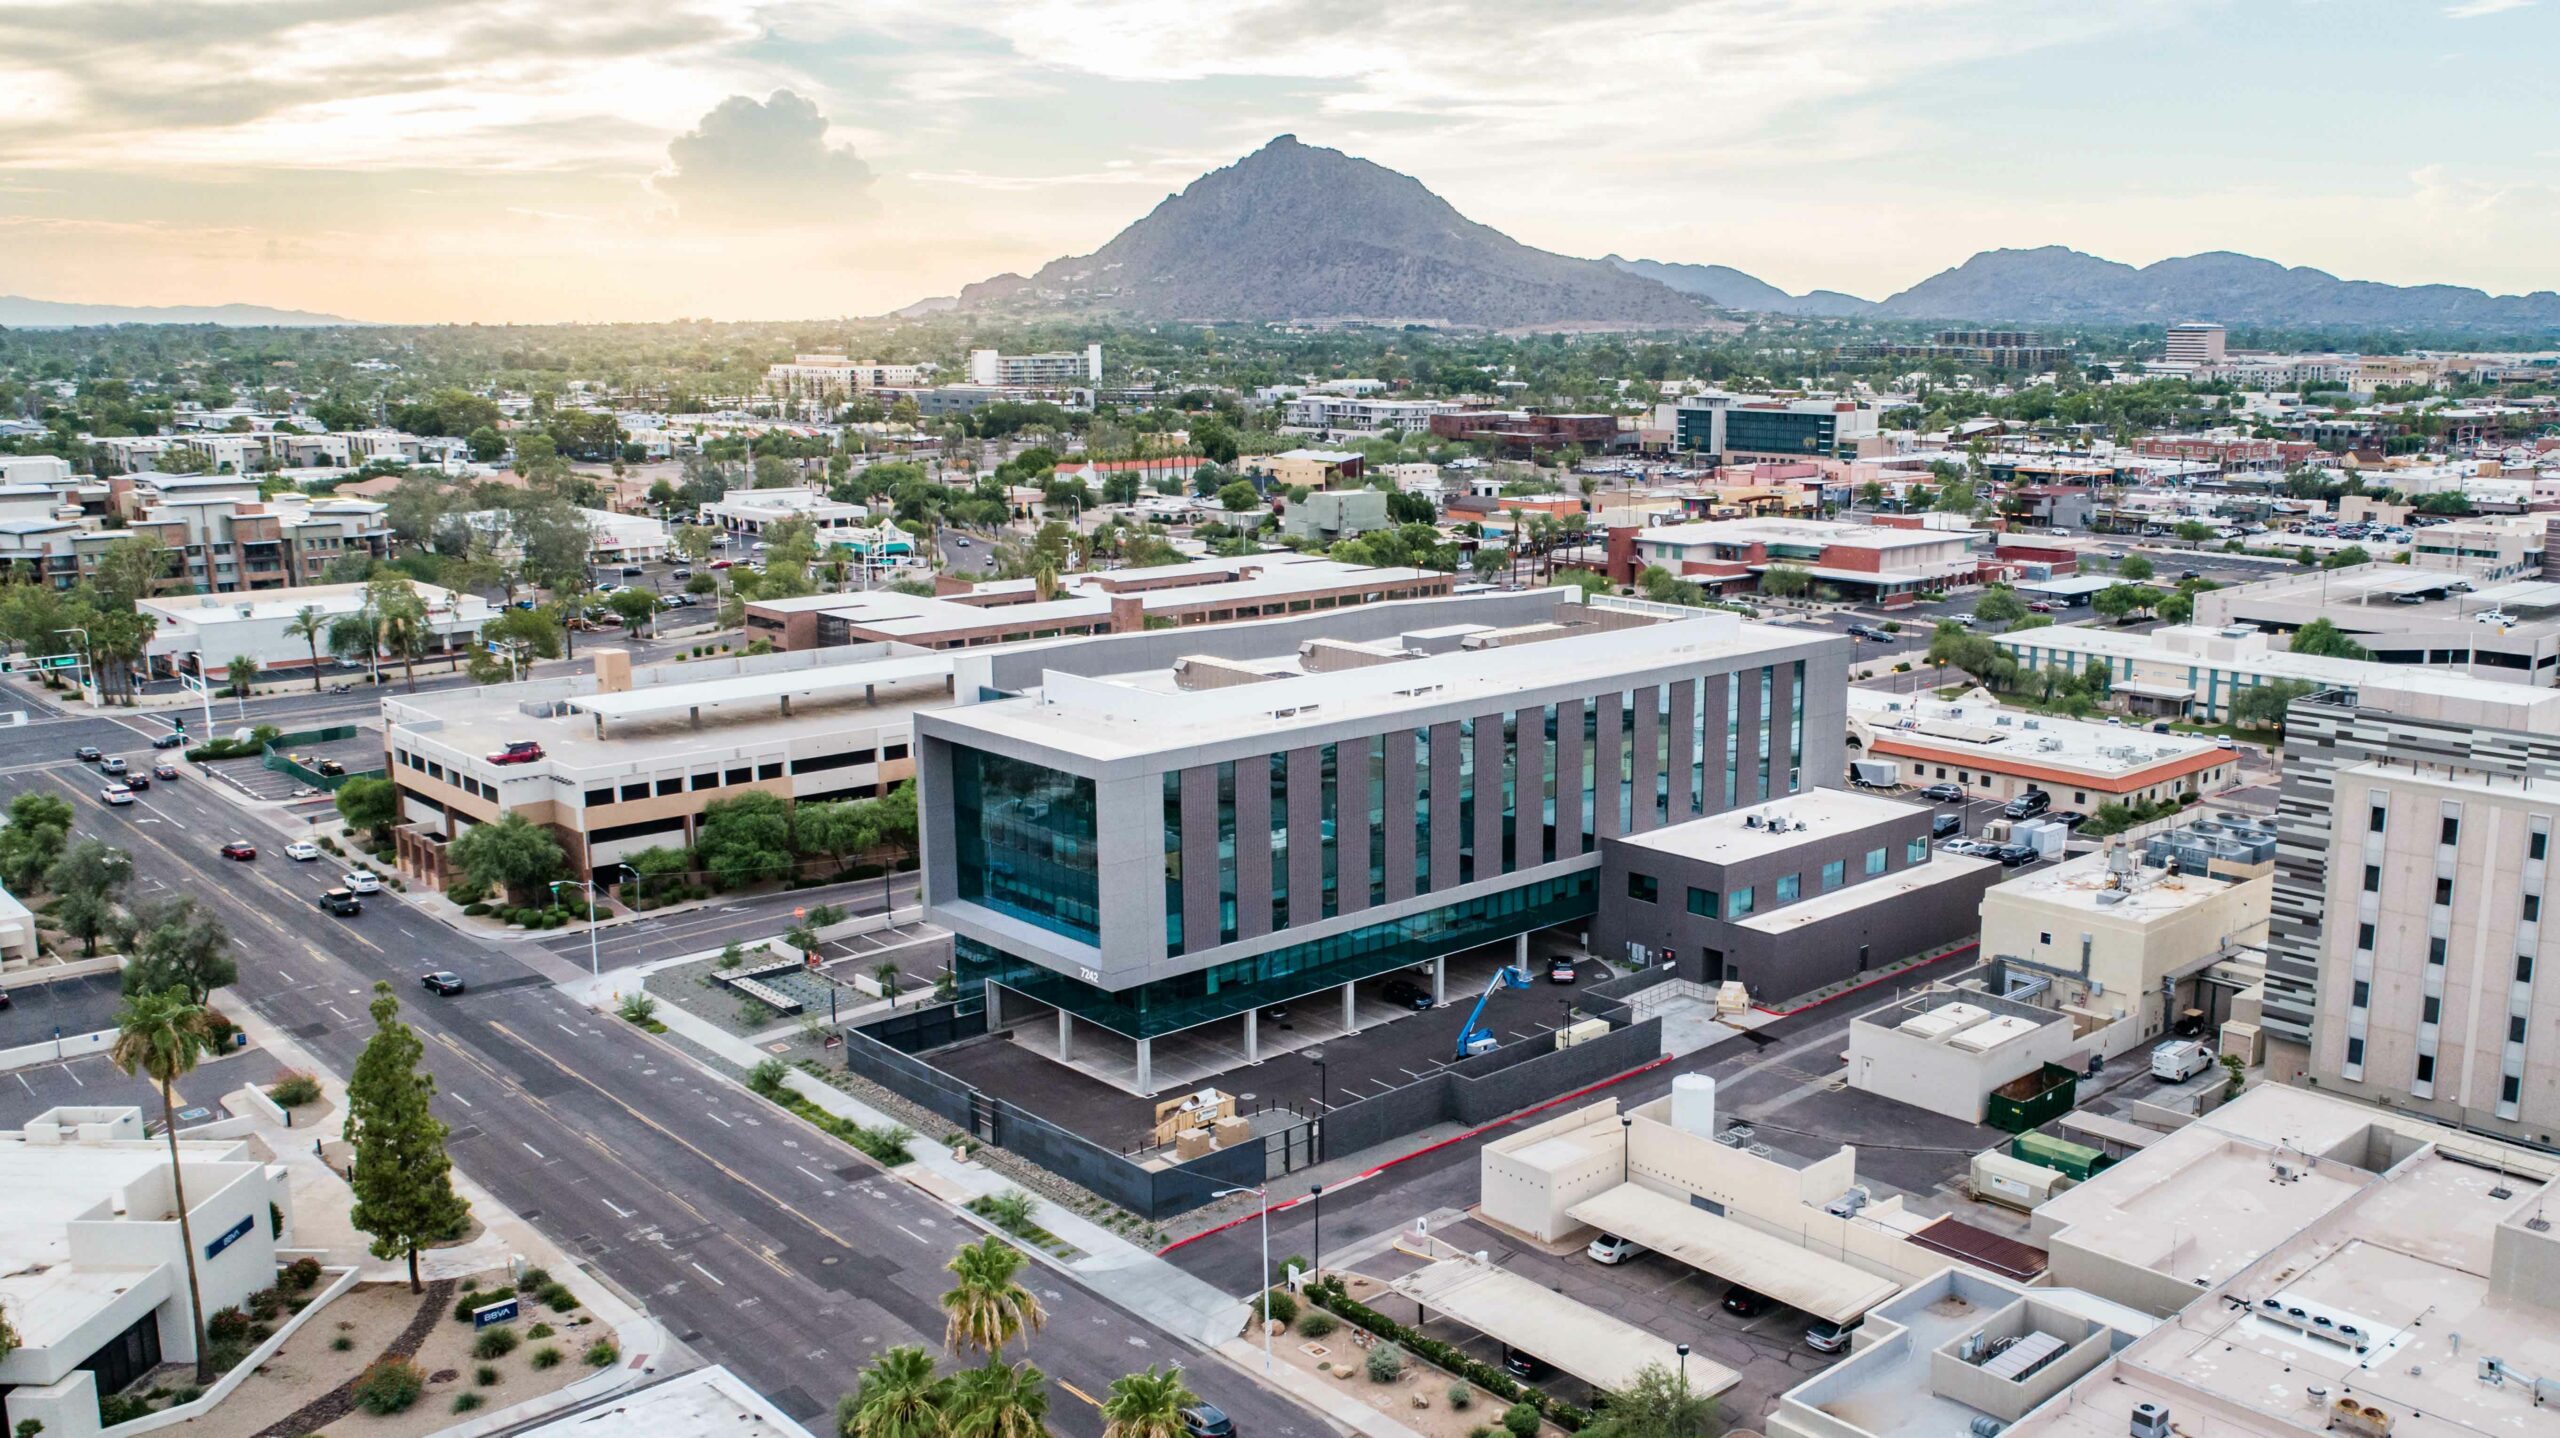 An aerial view of downtown Scottsdale, Arizona featuring HonorHealth Neurology.